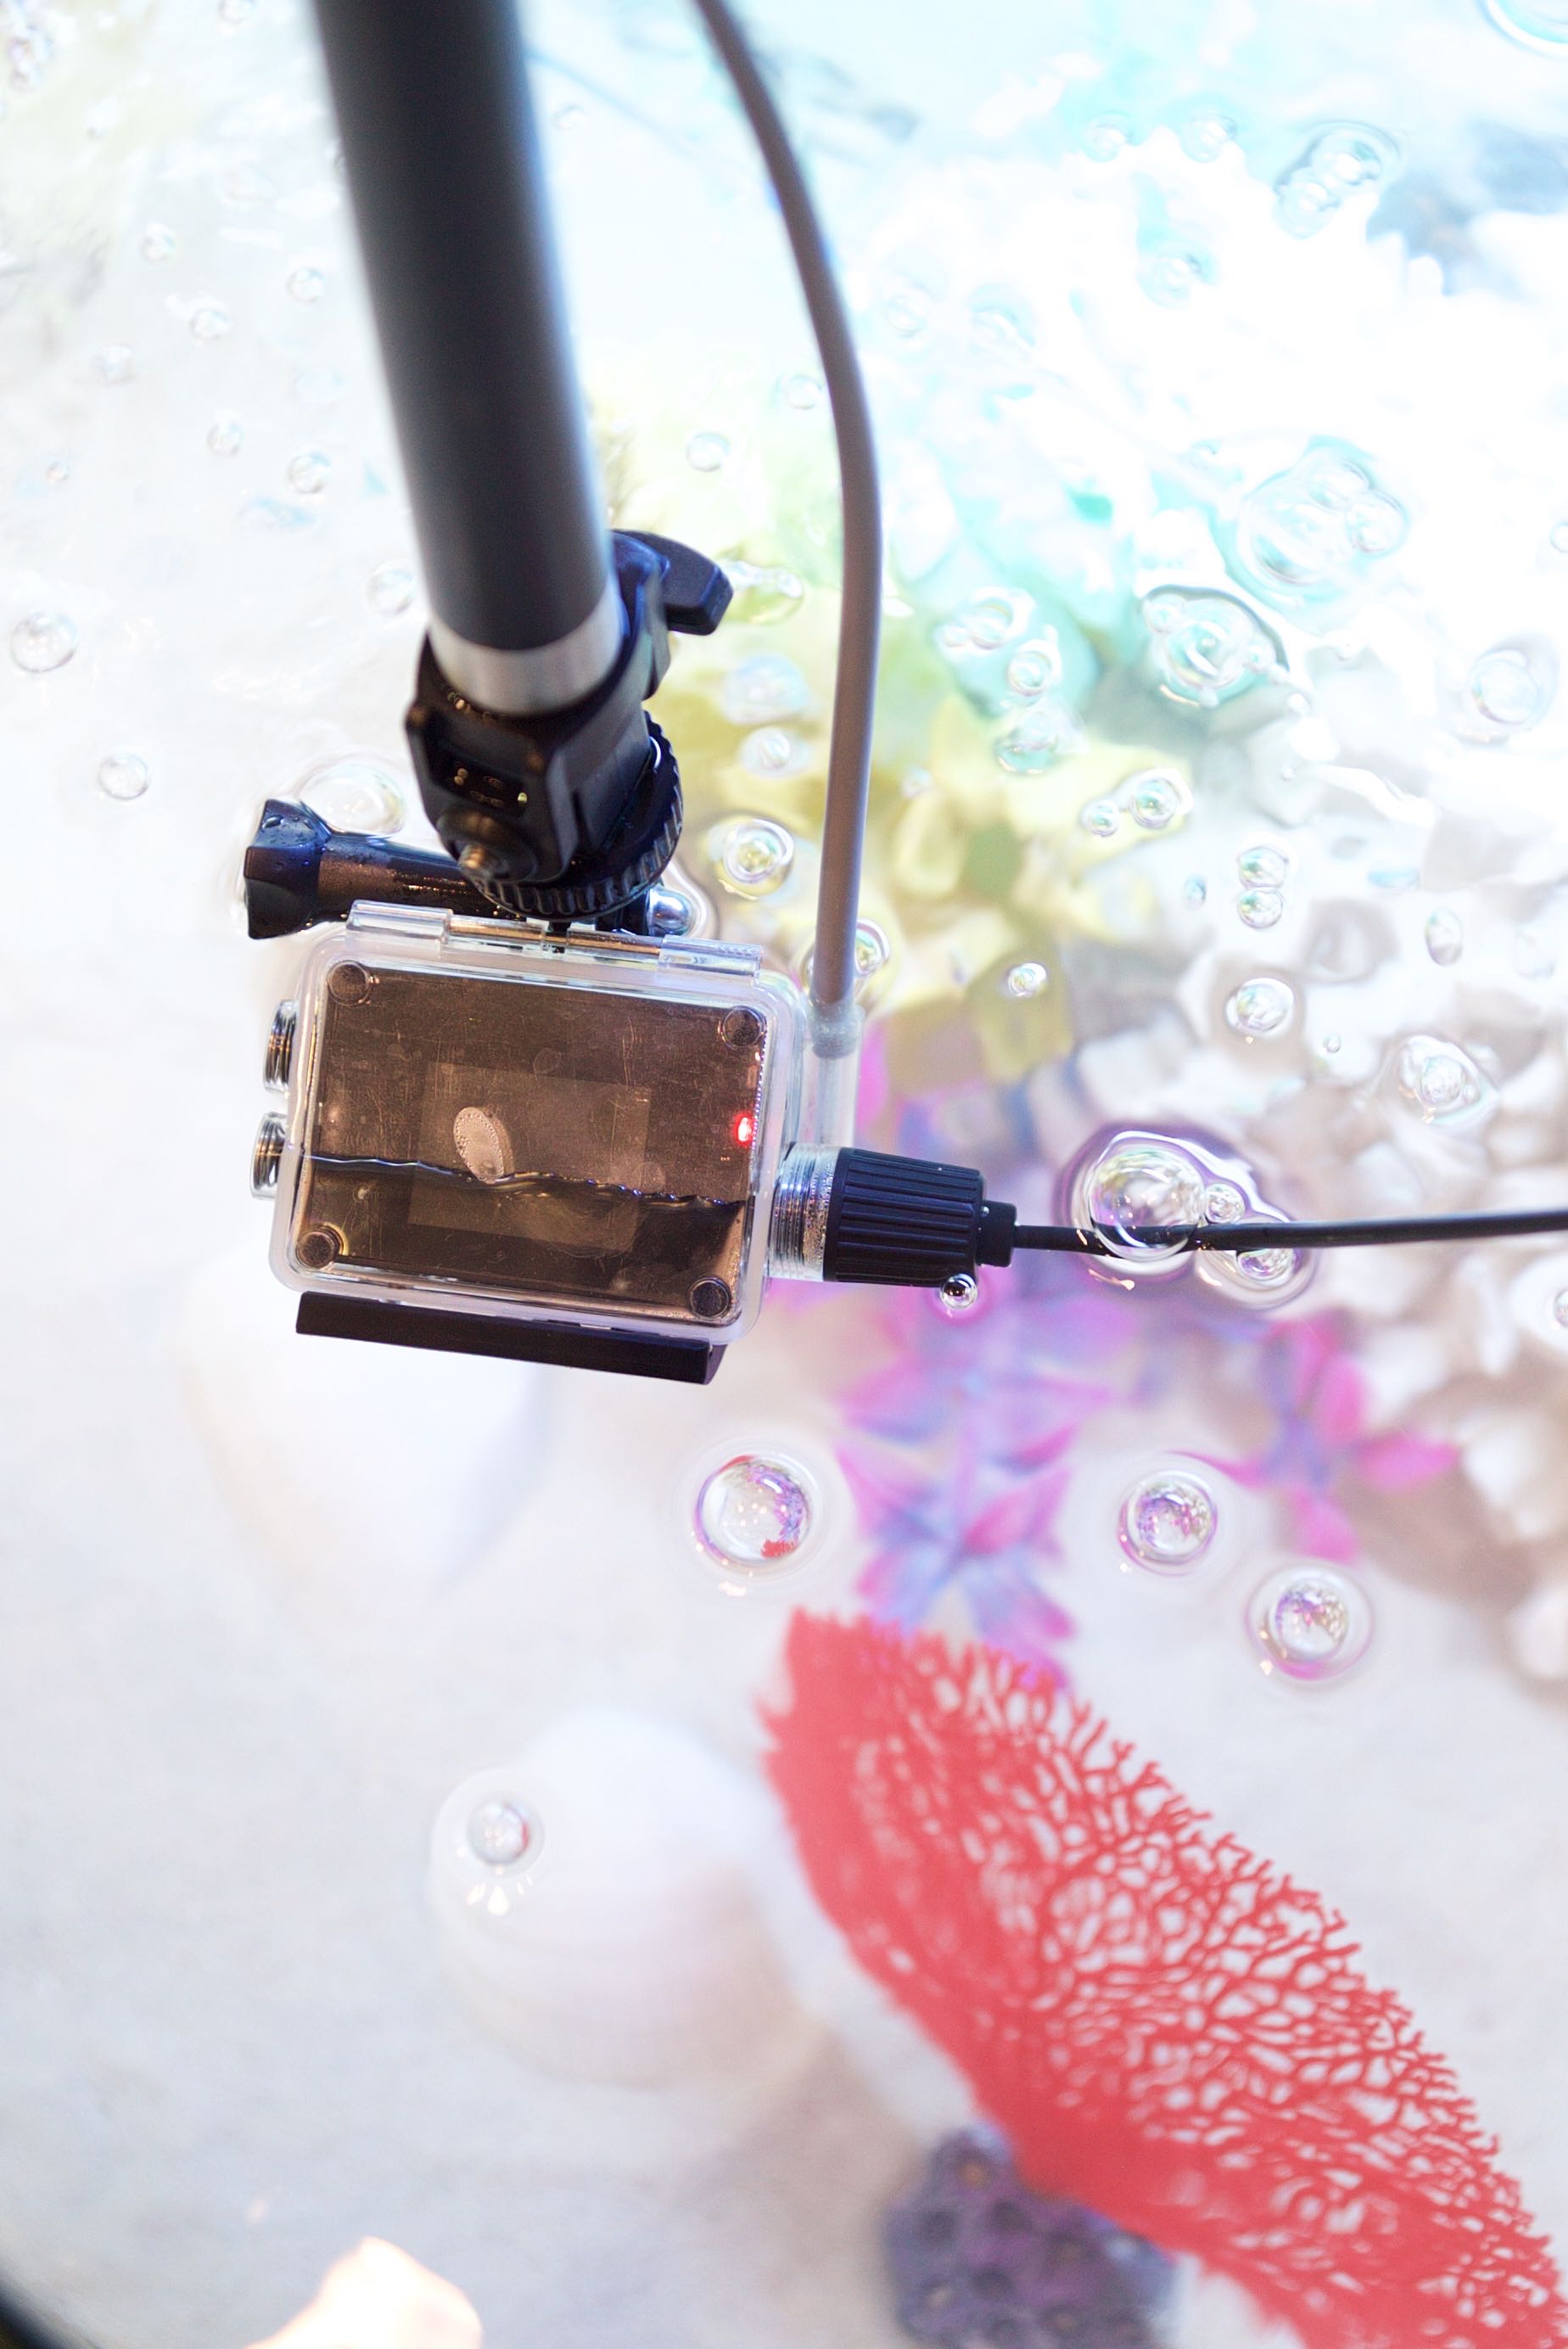 GoPro Underwater WiFi Extension Cable - CamDo Solutions